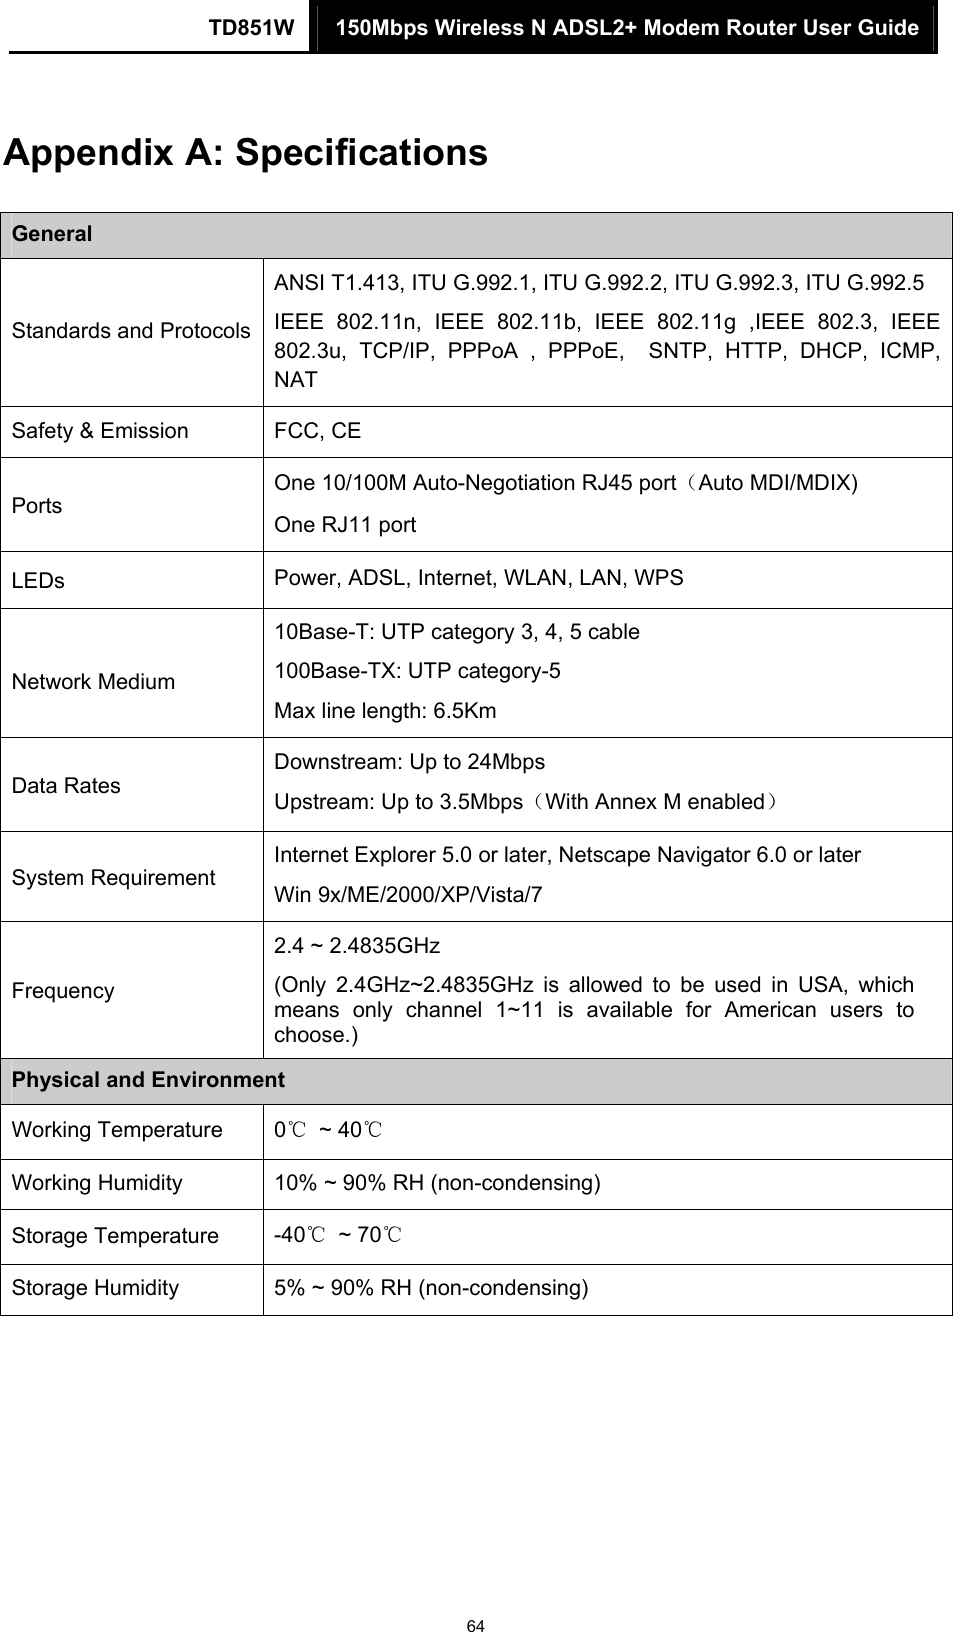 TD851W  150Mbps Wireless N ADSL2+ Modem Router User Guide 64 Appendix A: Specifications General Standards and Protocols ANSI T1.413, ITU G.992.1, ITU G.992.2, ITU G.992.3, ITU G.992.5 IEEE 802.11n, IEEE 802.11b, IEEE 802.11g ,IEEE 802.3, IEEE 802.3u, TCP/IP, PPPoA , PPPoE,  SNTP, HTTP, DHCP, ICMP, NAT Safety &amp; Emission  FCC, CE Ports  One 10/100M Auto-Negotiation RJ45 port（Auto MDI/MDIX) One RJ11 port LEDs  Power, ADSL, Internet, WLAN, LAN, WPS Network Medium 10Base-T: UTP category 3, 4, 5 cable 100Base-TX: UTP category-5 Max line length: 6.5Km Data Rates Downstream: Up to 24Mbps Upstream: Up to 3.5Mbps（With Annex M enabled） System Requirement  Internet Explorer 5.0 or later, Netscape Navigator 6.0 or later Win 9x/ME/2000/XP/Vista/7 Frequency 2.4 ~ 2.4835GHz (Only 2.4GHz~2.4835GHz is allowed to be used in USA, which means only channel 1~11 is available for American users to choose.) Physical and Environment Working Temperature  0℃ ~ 40℃ Working Humidity  10% ~ 90% RH (non-condensing) Storage Temperature  -40℃ ~ 70℃ Storage Humidity  5% ~ 90% RH (non-condensing) 